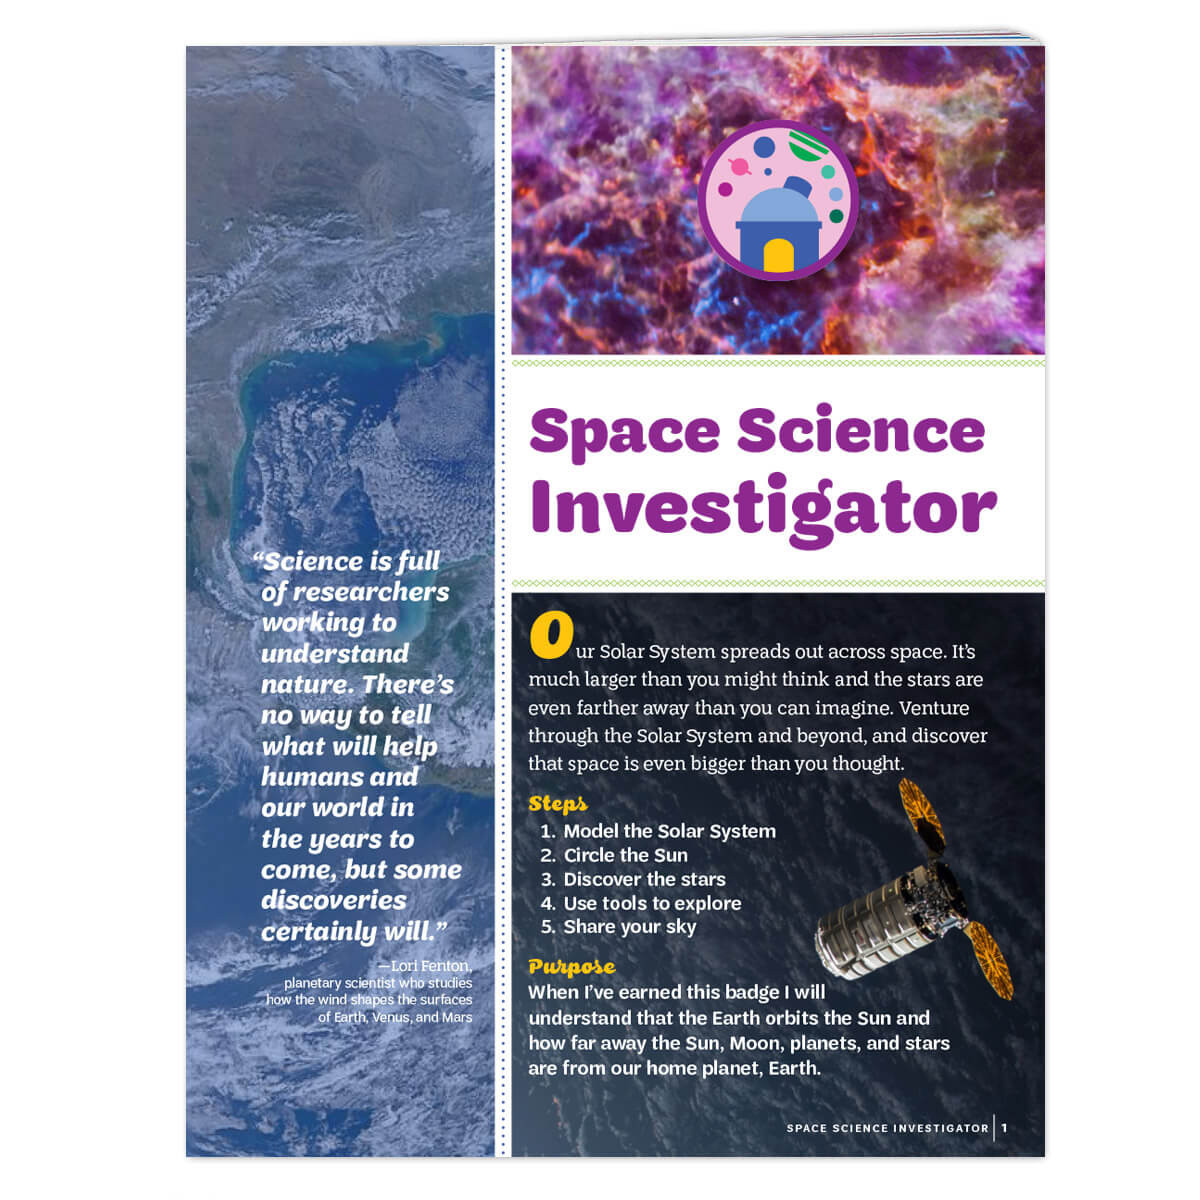 Space Science Investigator Badge Requirements